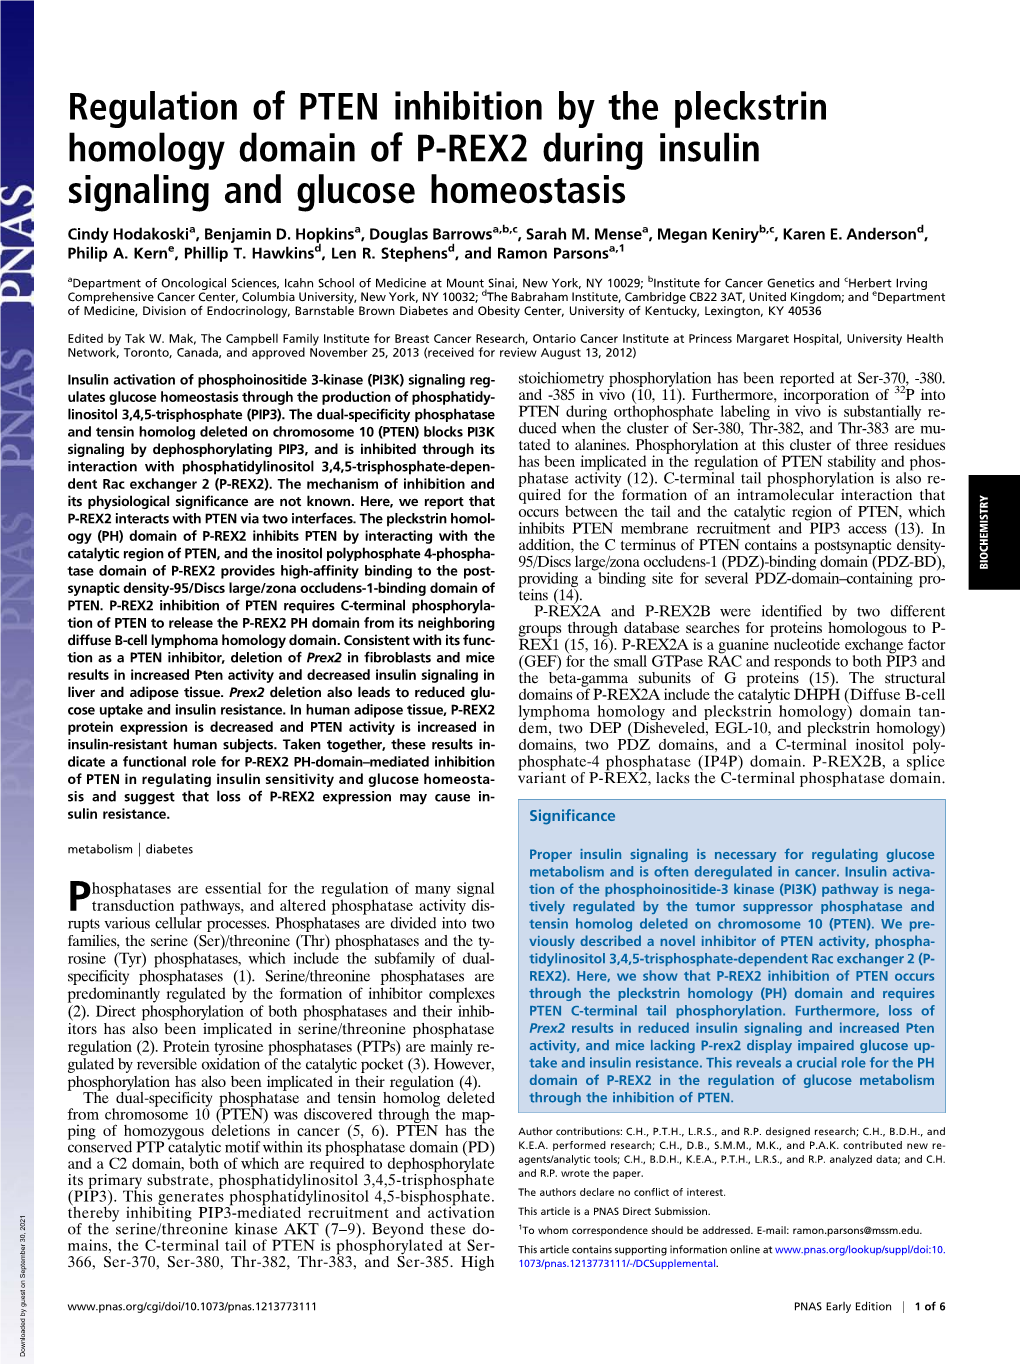 Regulation of PTEN Inhibition by the Pleckstrin Homology Domain of P-REX2 During Insulin Signaling and Glucose Homeostasis